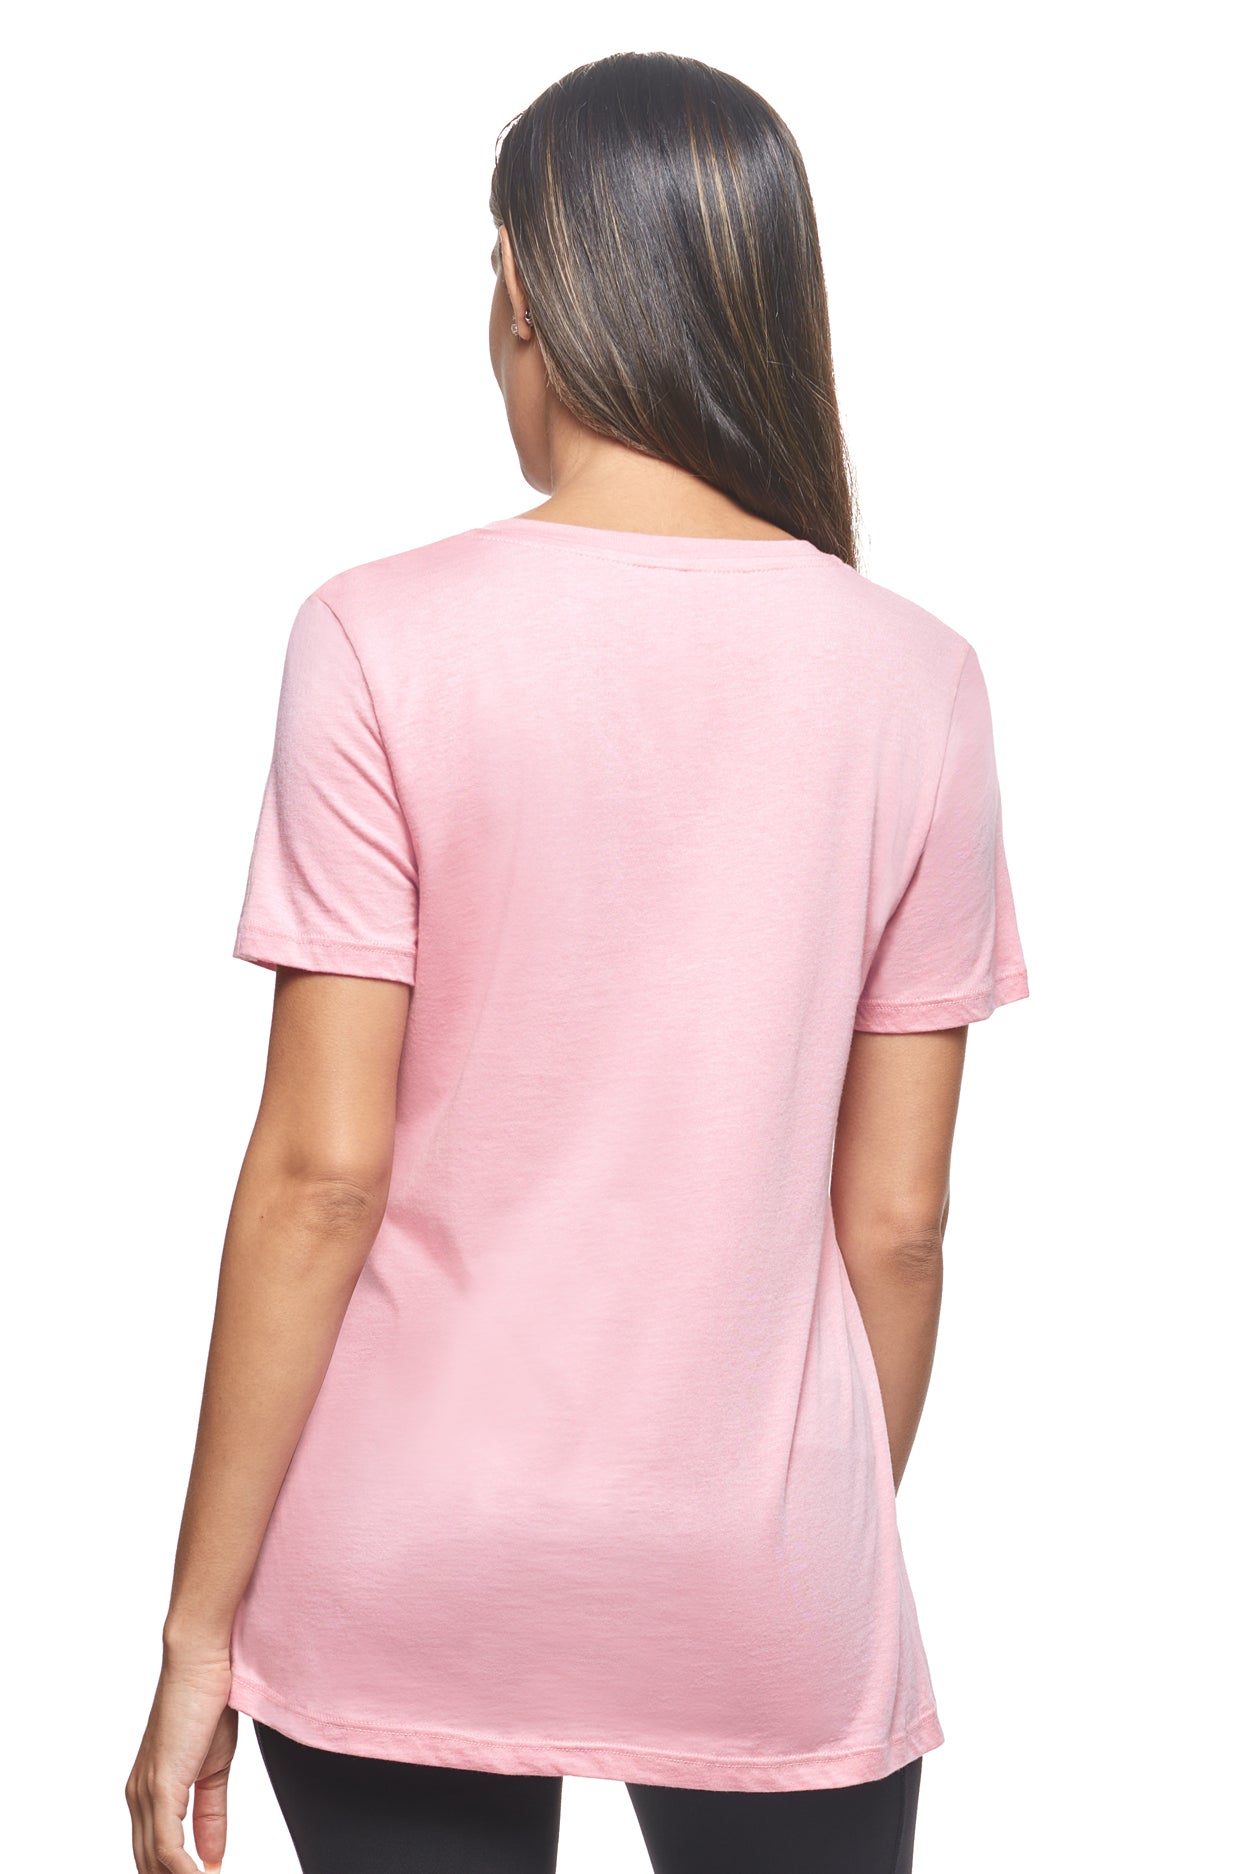 Expert Brand Retail Sustainable Eco-Friendly Micromodal Cotton Women's V-neck T-shirt Made in the USA pale pink 3#color_pale-pink